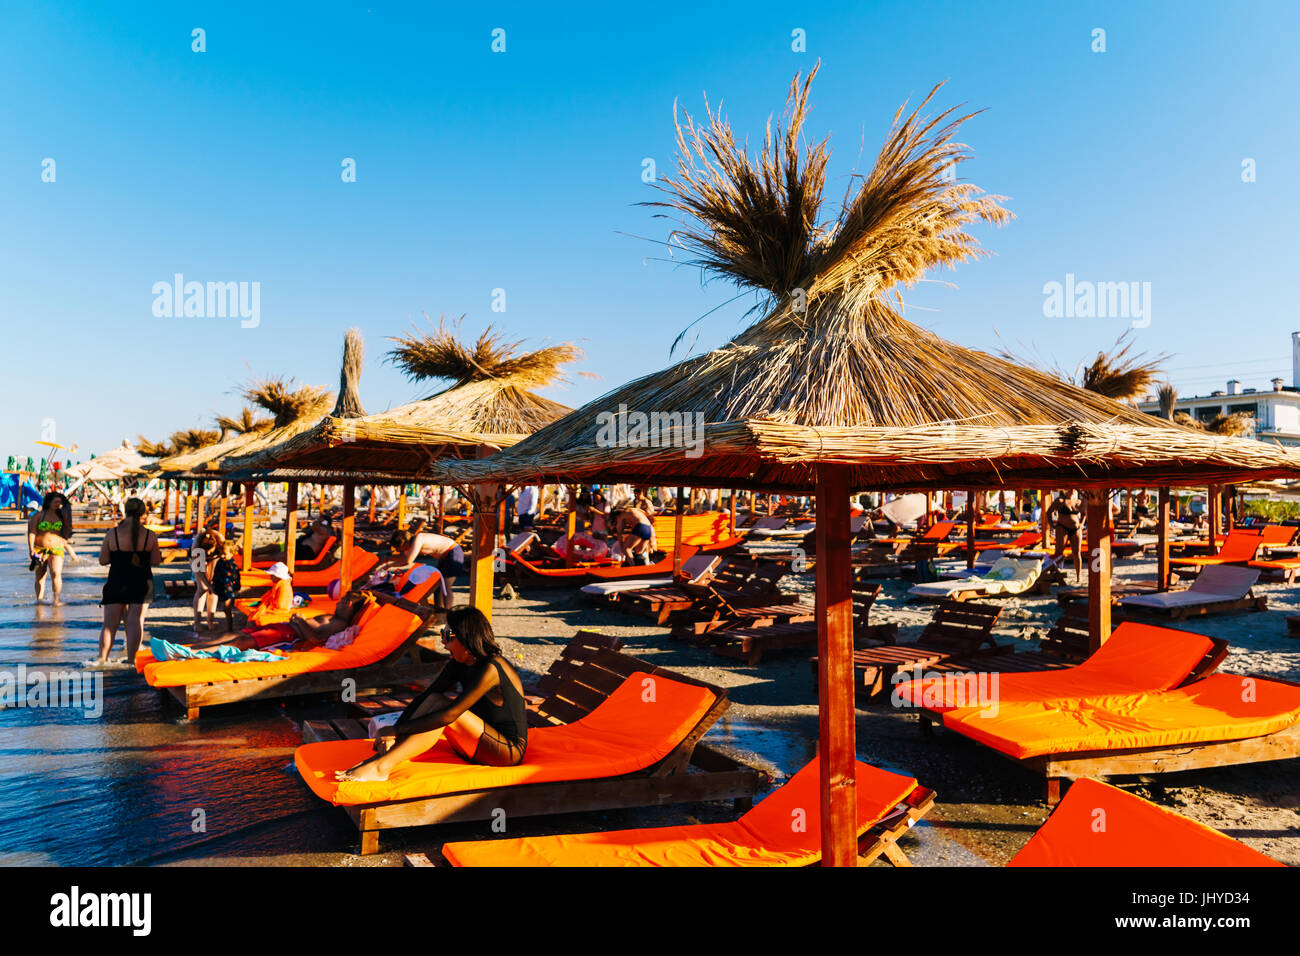 MAMAIA, ROMANIA - JULY 14, 2017: People Having Fun In Water And Relaxing In Mamaia Beach Resort At The Black Sea In Romania. Stock Photo